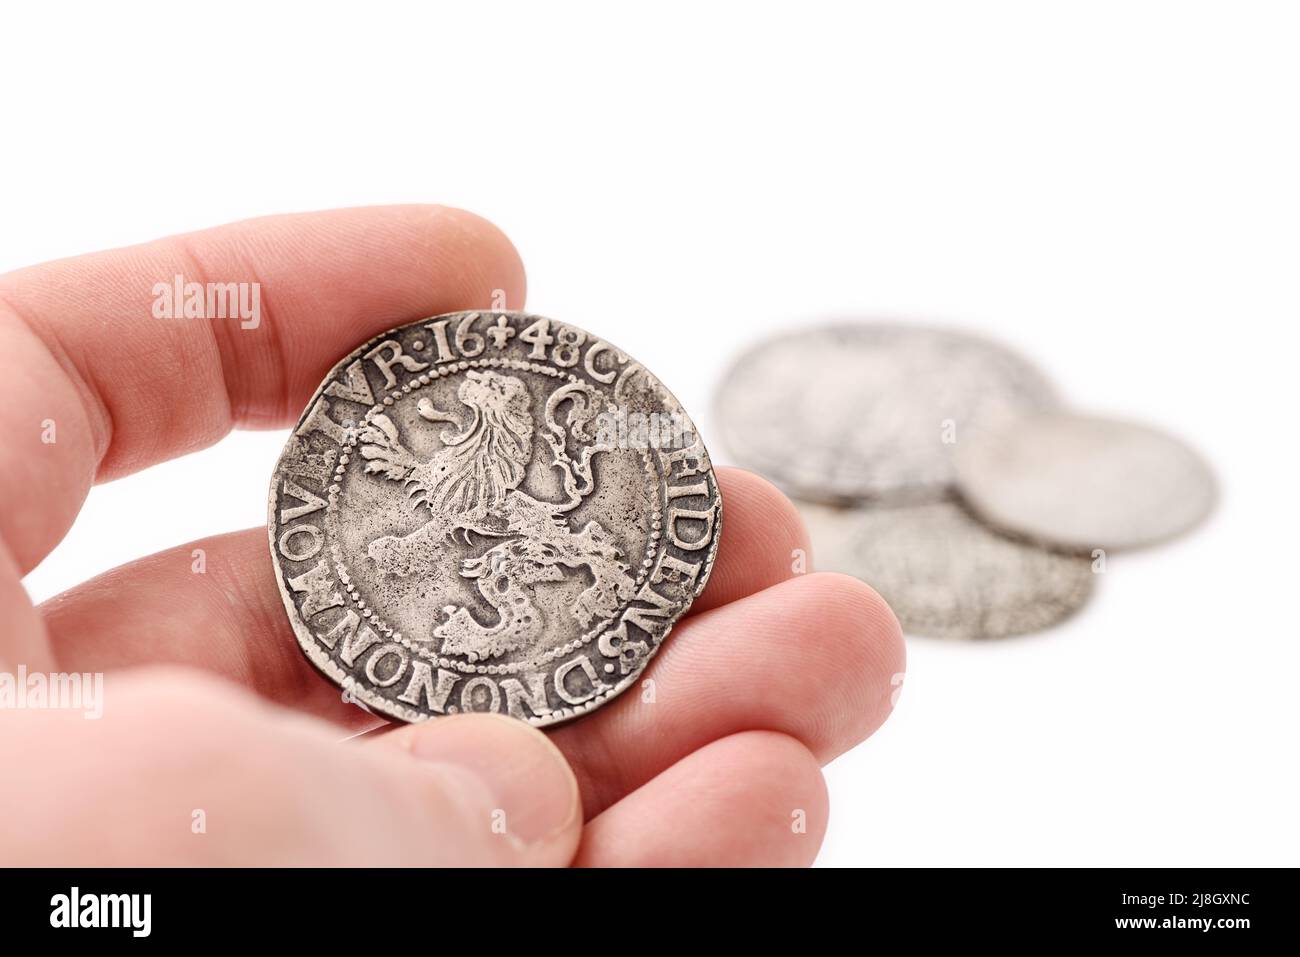 Male hand holding old silver thaler with lion on reverse. Old coins on white background. Lion Daalder. Selective focus Stock Photo